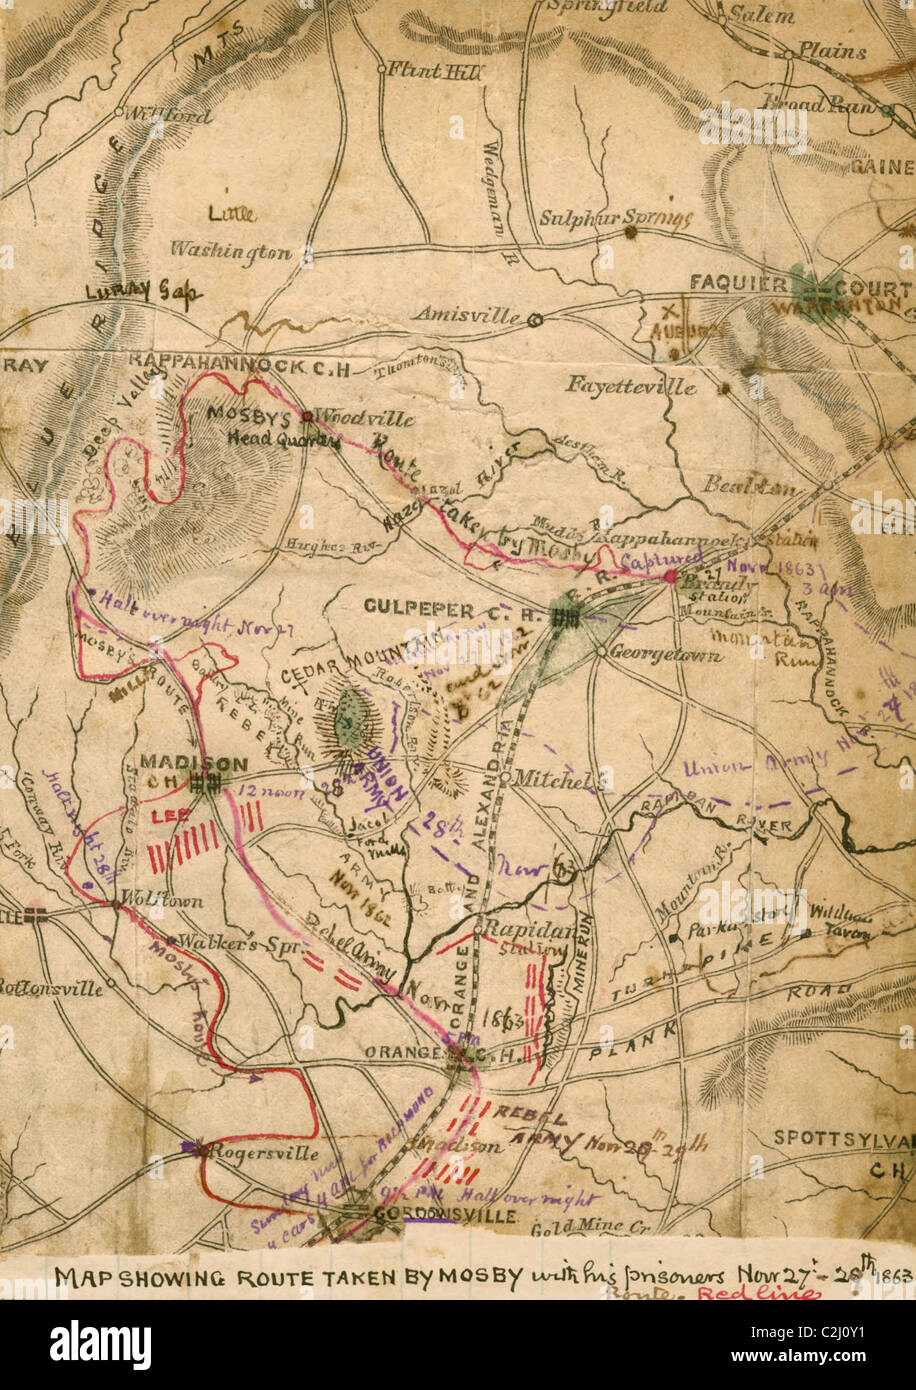 route taken by Mosby with his prisoners, Nov. 27th-29th, 1863. Stock Photo